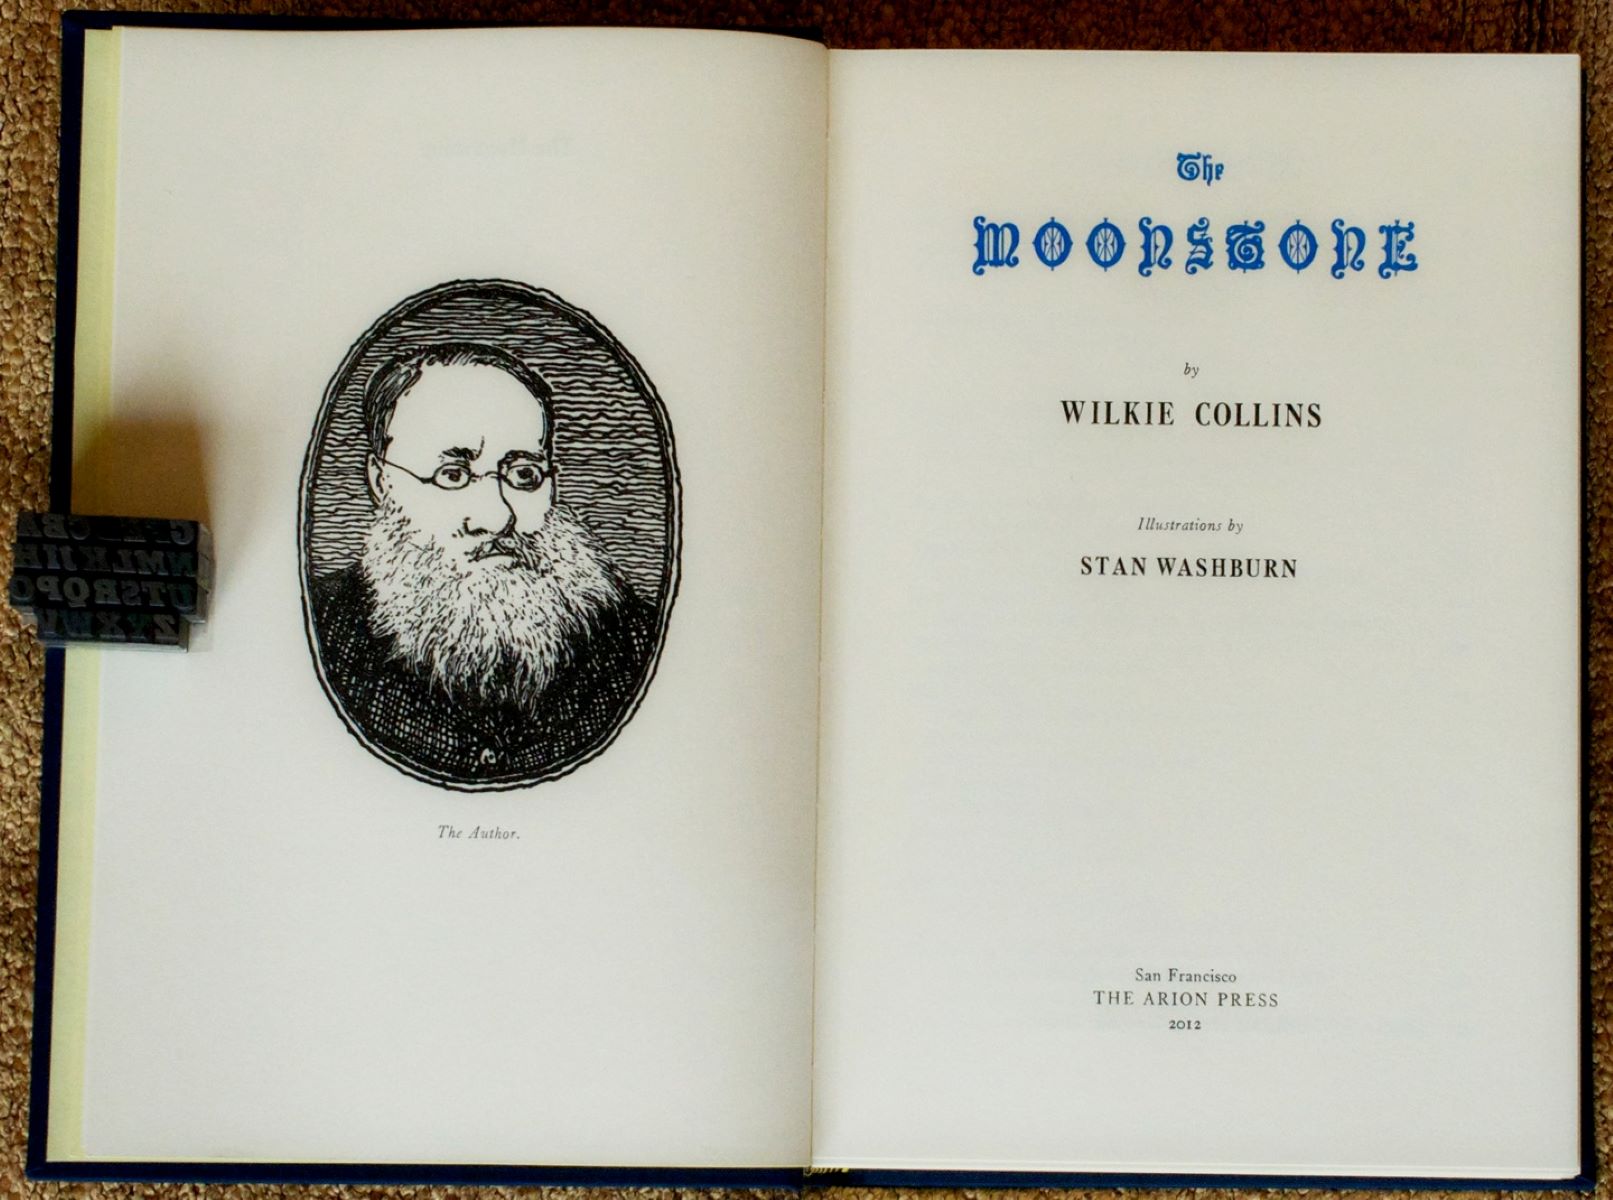 20-astonishing-facts-about-the-moonstone-wilkie-collins